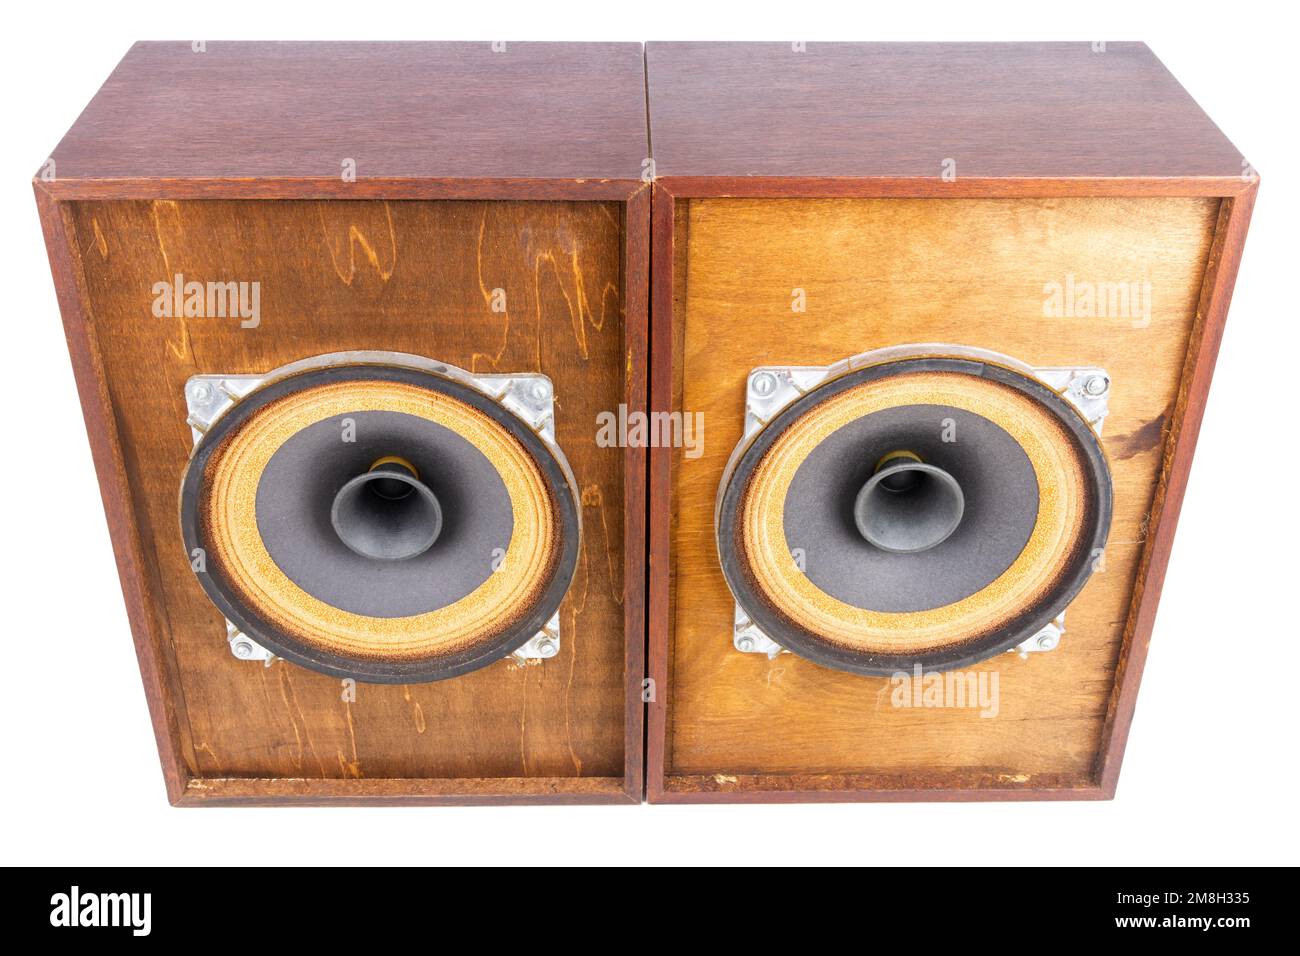 Two vintage speakers with full range drivers isolated on white background  Stock Photo - Alamy